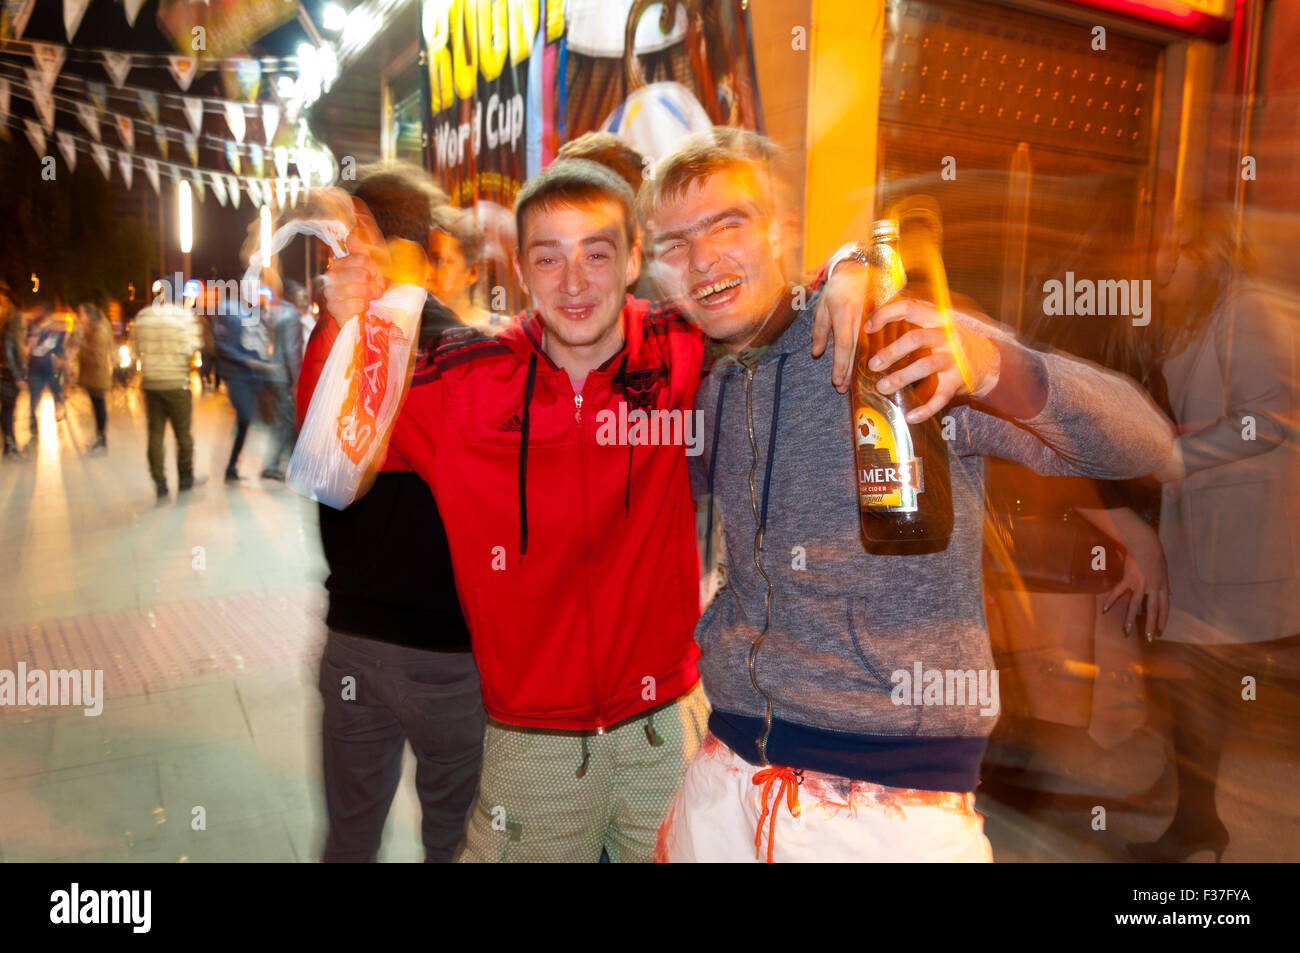 Young men under the influence of alcohol in Dublin, Ireland Stock Photo